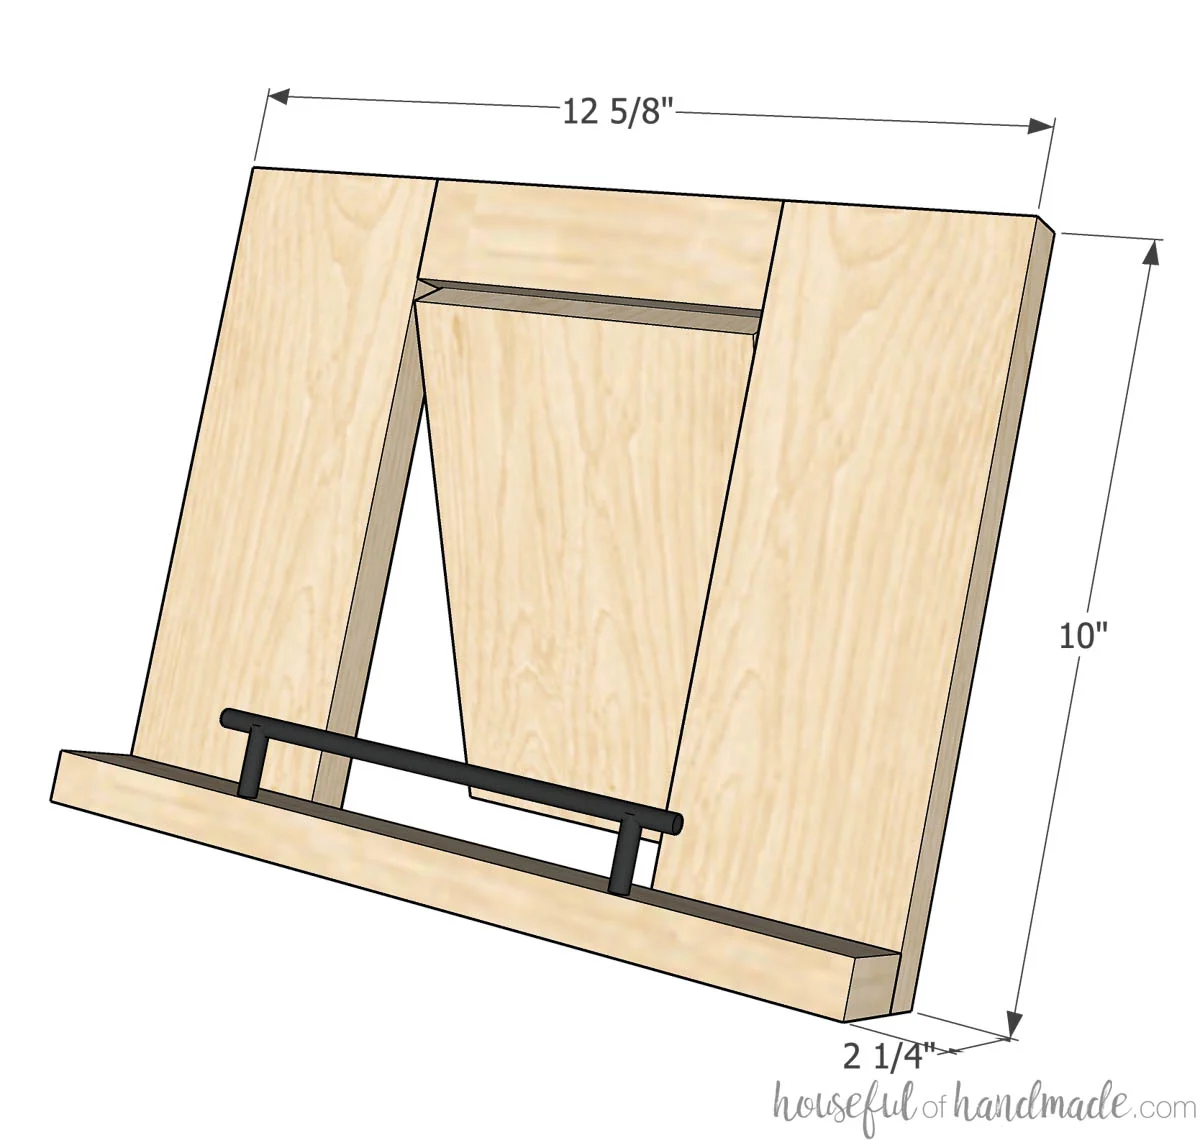 3D sketch of the folding cookbook holder with dimensions noted. 